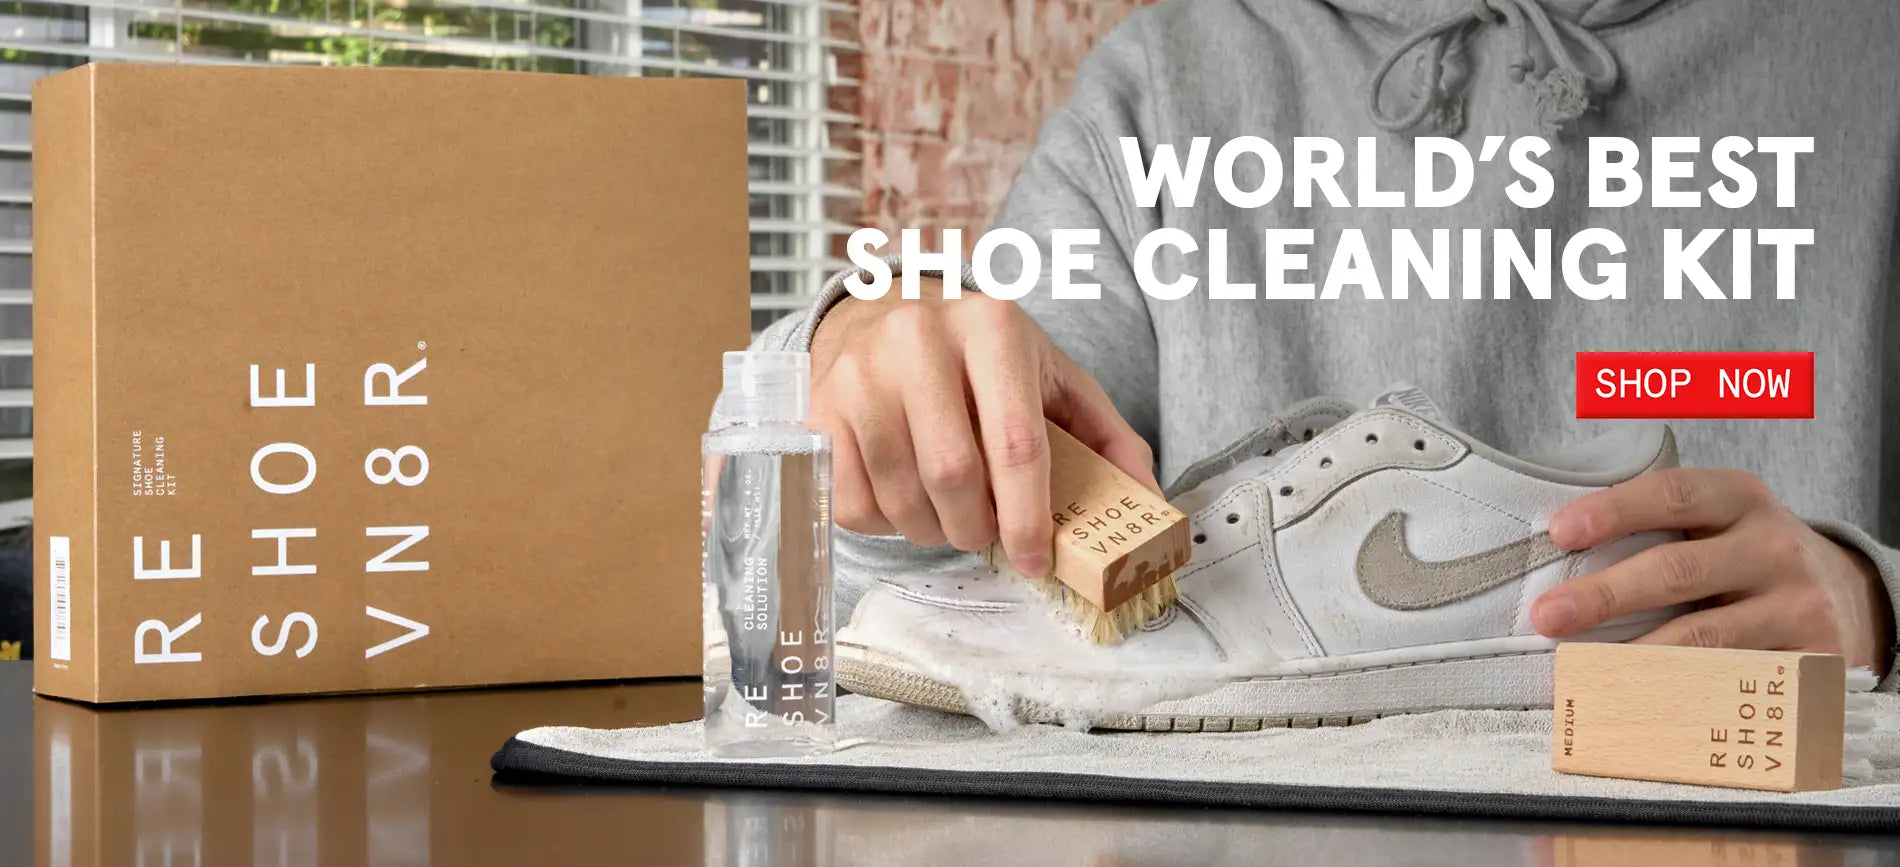 Superior Shoe Care & Sneaker Cleaning Products – Reshoevn8r